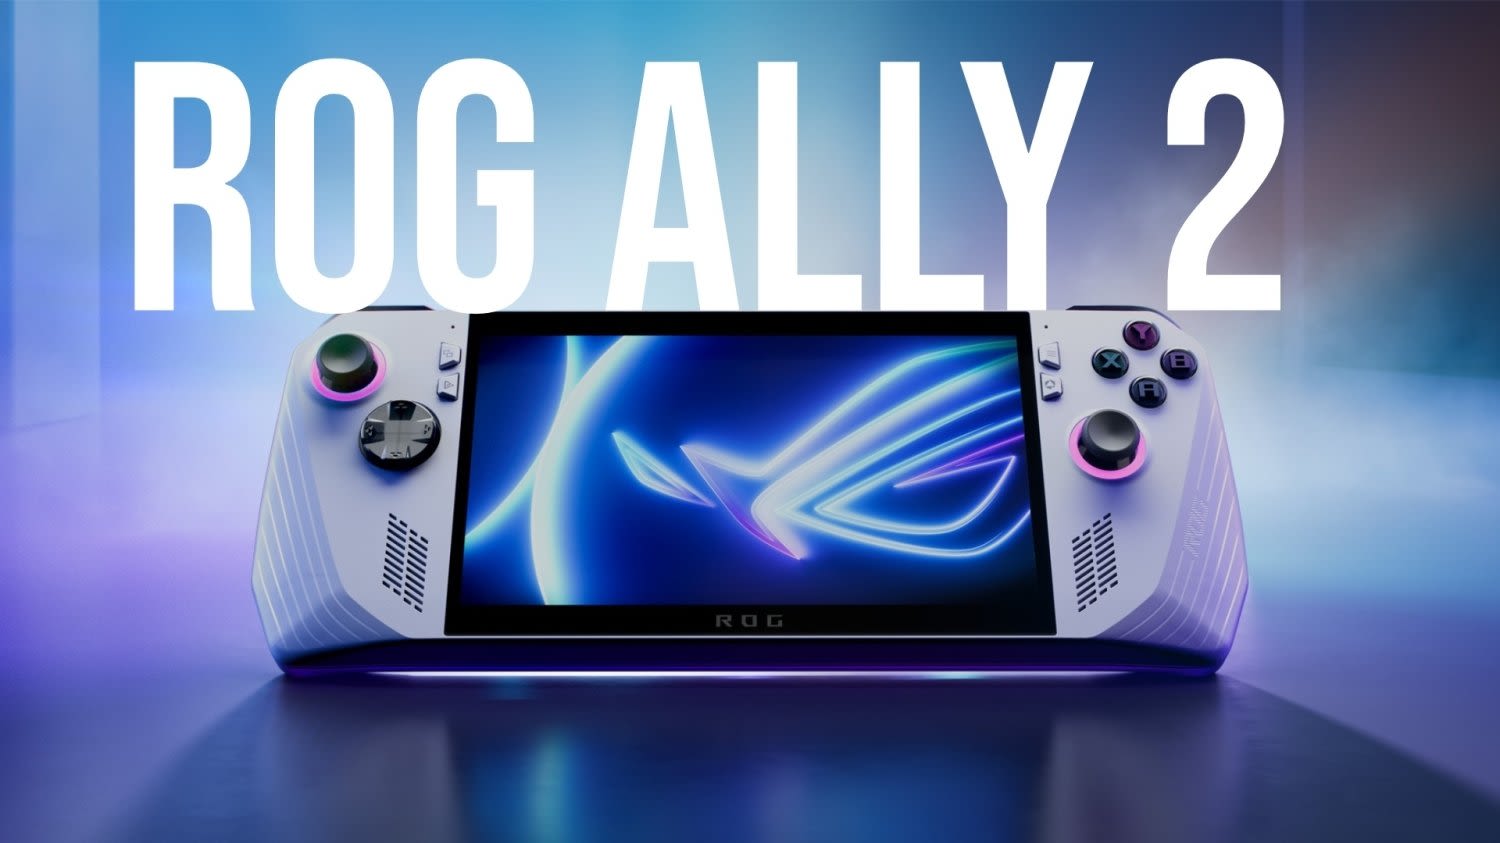 ASUS teases ROG Ally 2, the company's next PC gaming handheld, to be revealed tomorrow